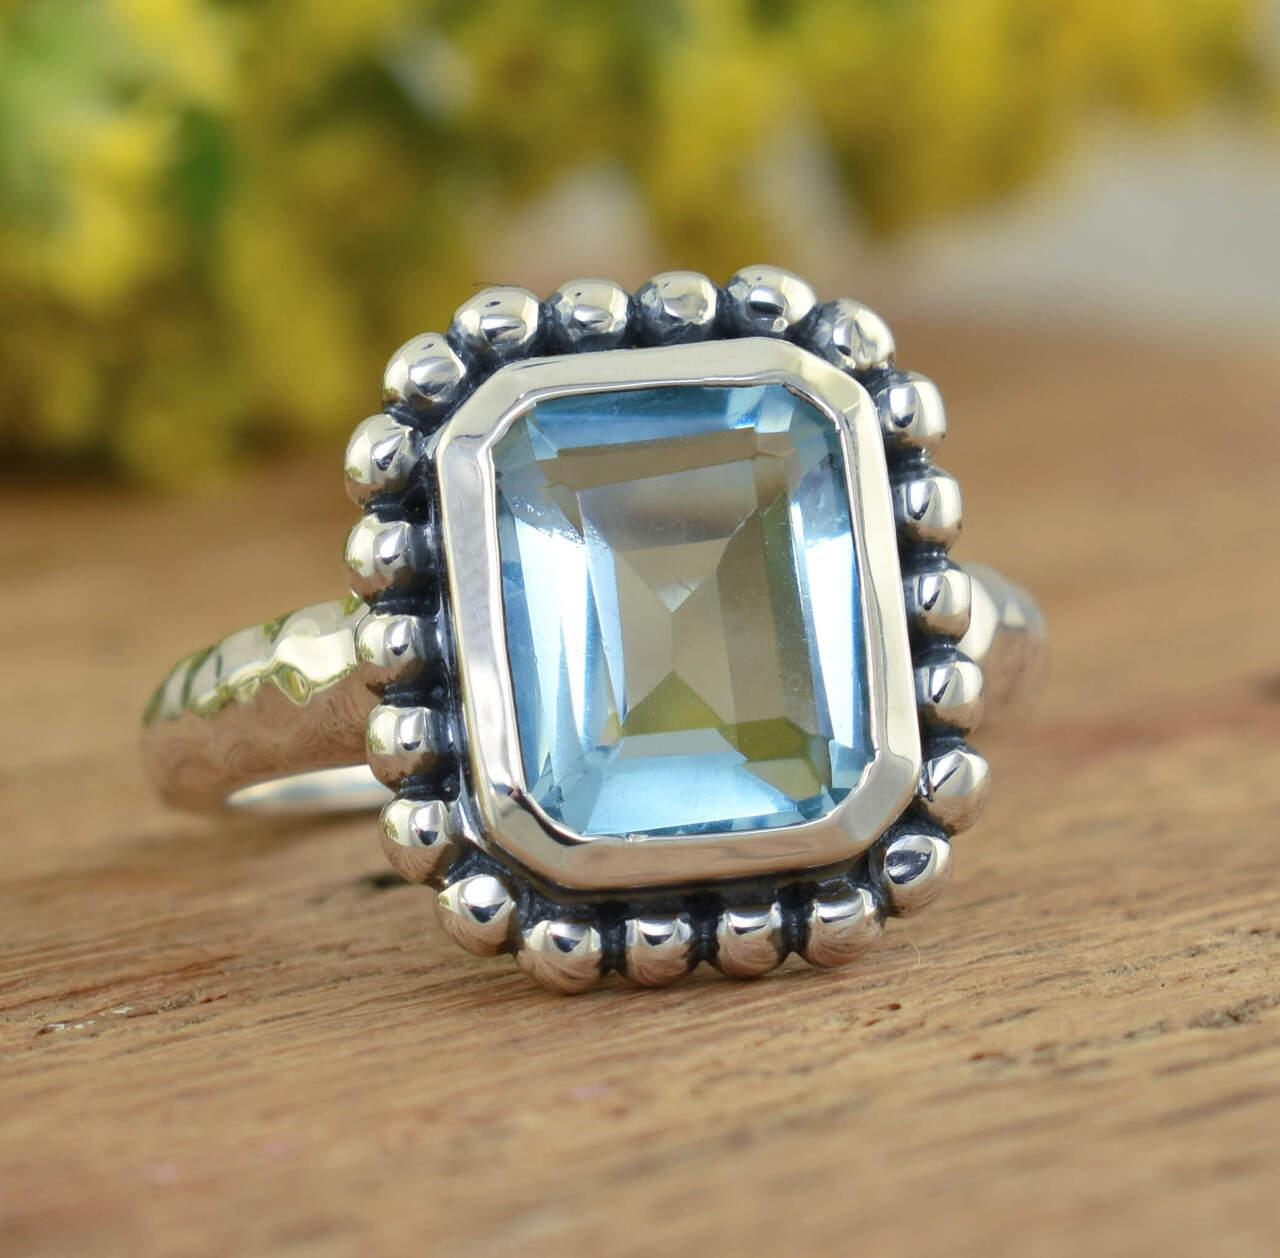 Emerald cut light blue CZ ring with antiqued sterling silver